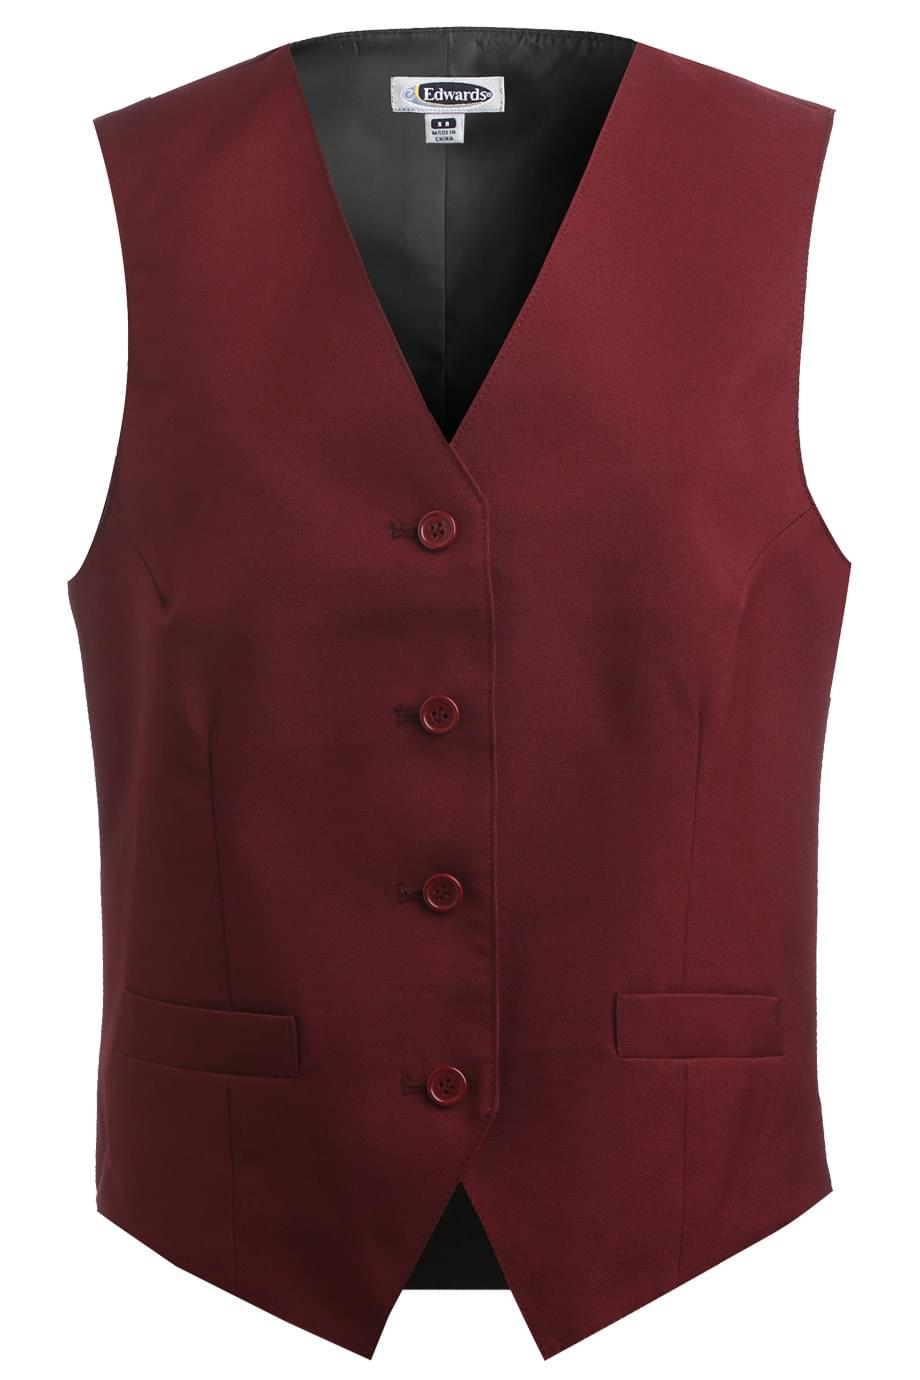 Edwards XS Ladies' Burgundy Essential Polyester Vest (4 Buttons)